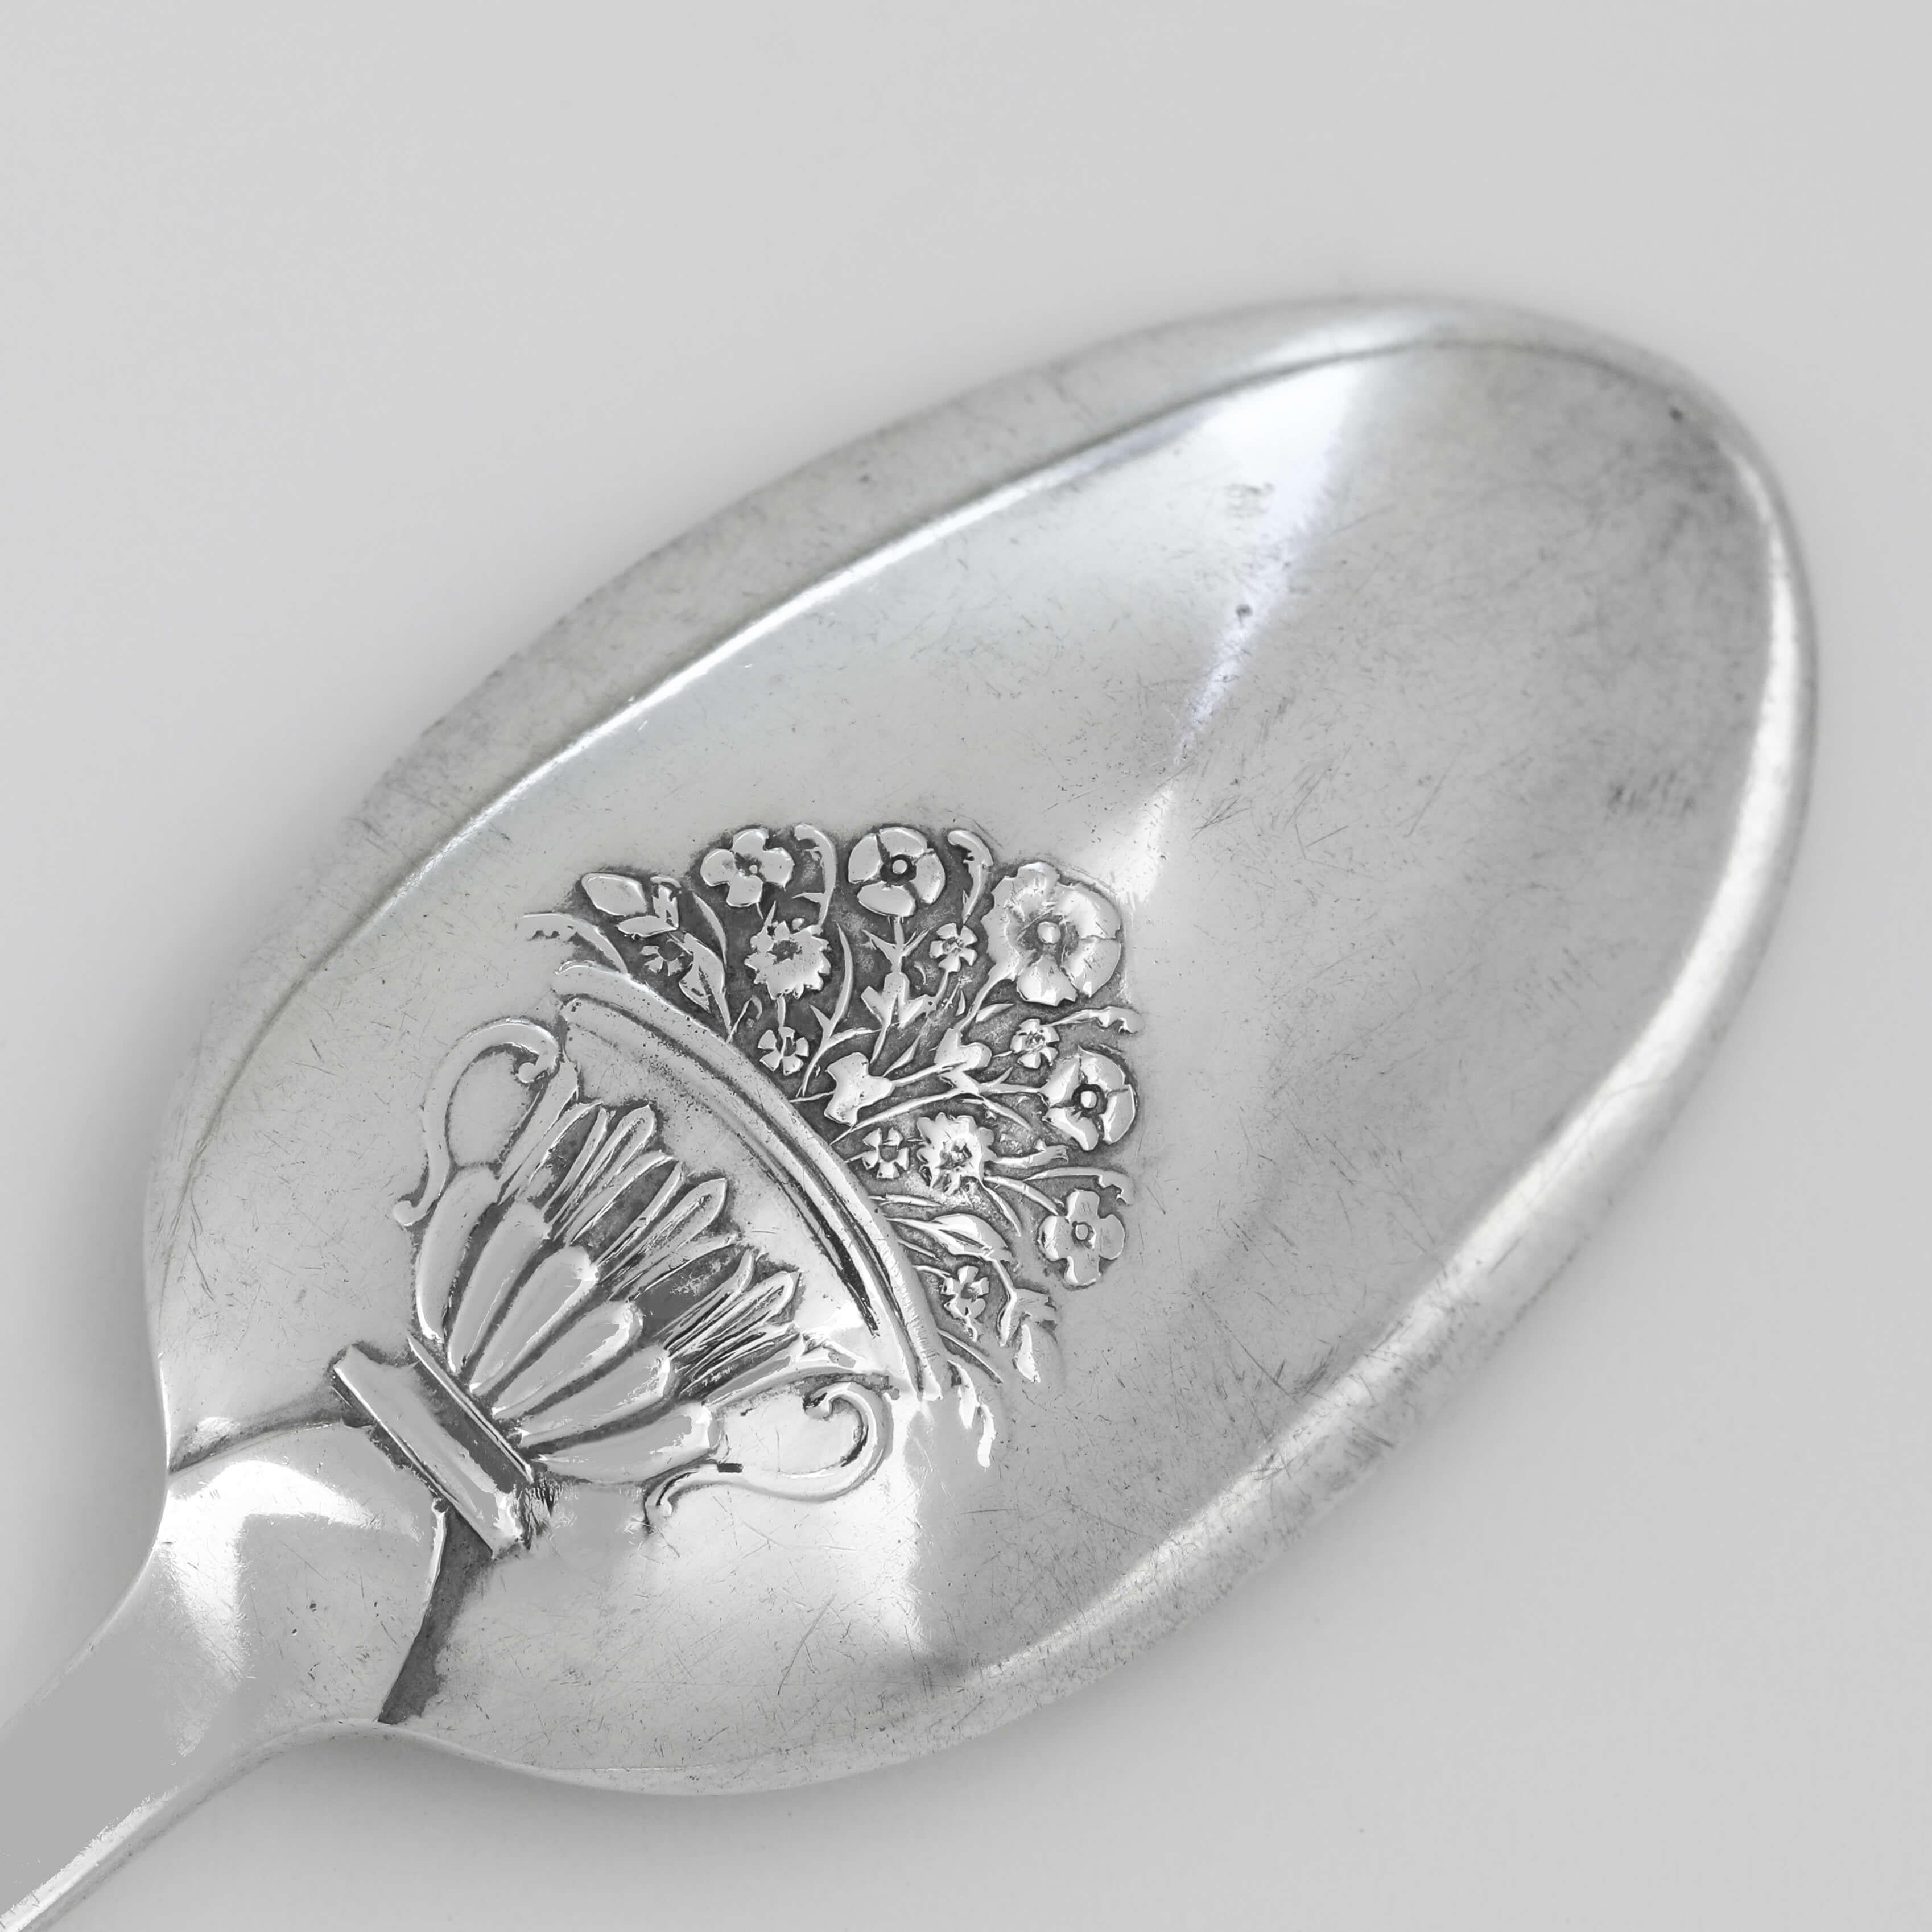 English Victorian Antique Sterling Silver 'Picture Back' Tea Spoons & Sugar Tongs - 1890